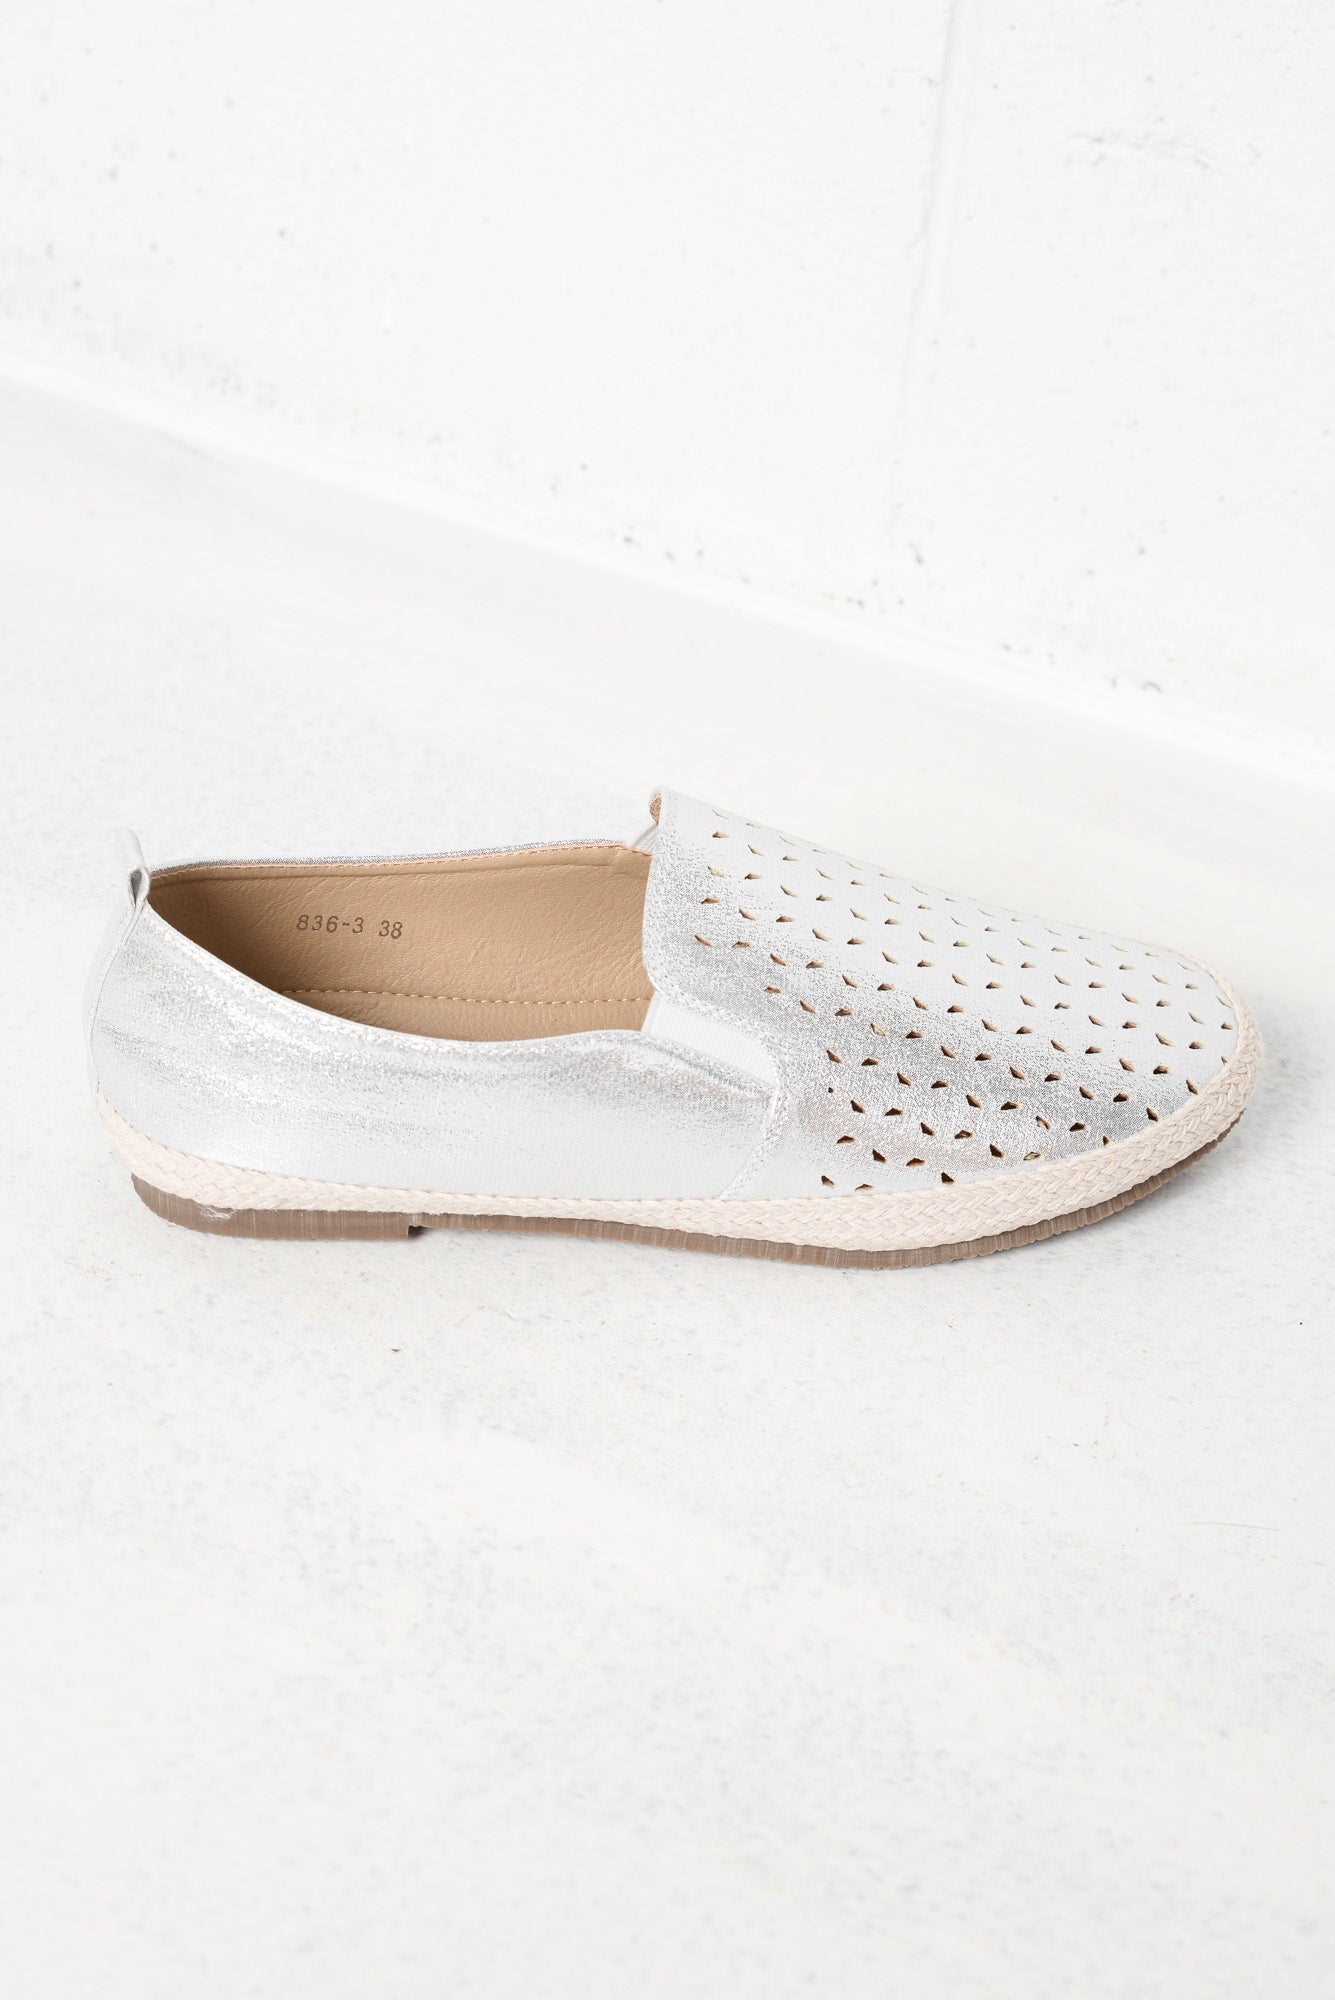 silver slip on shoes